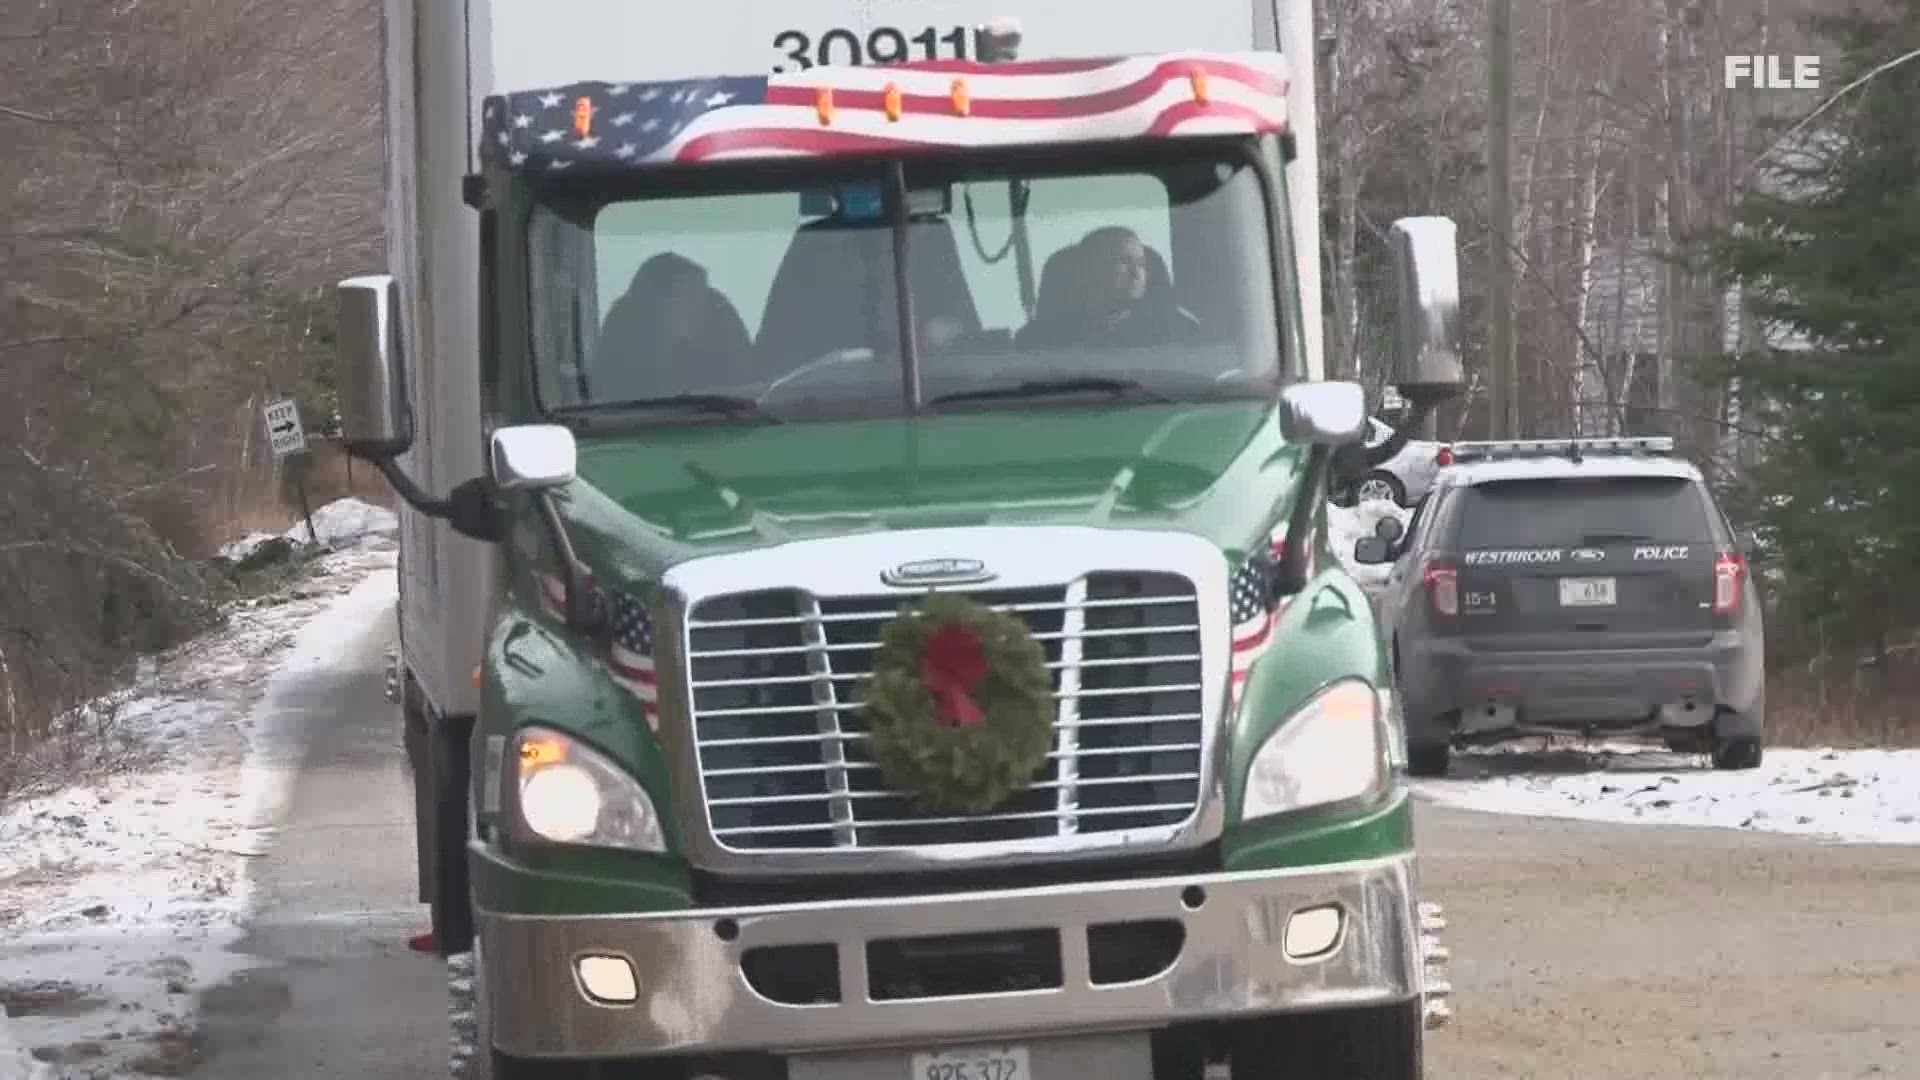 The 2020 annual Wreaths Across America convoy is departing from Maine on Tuesday, December 15 at 9 a.m. for Arlington National Cemetery.